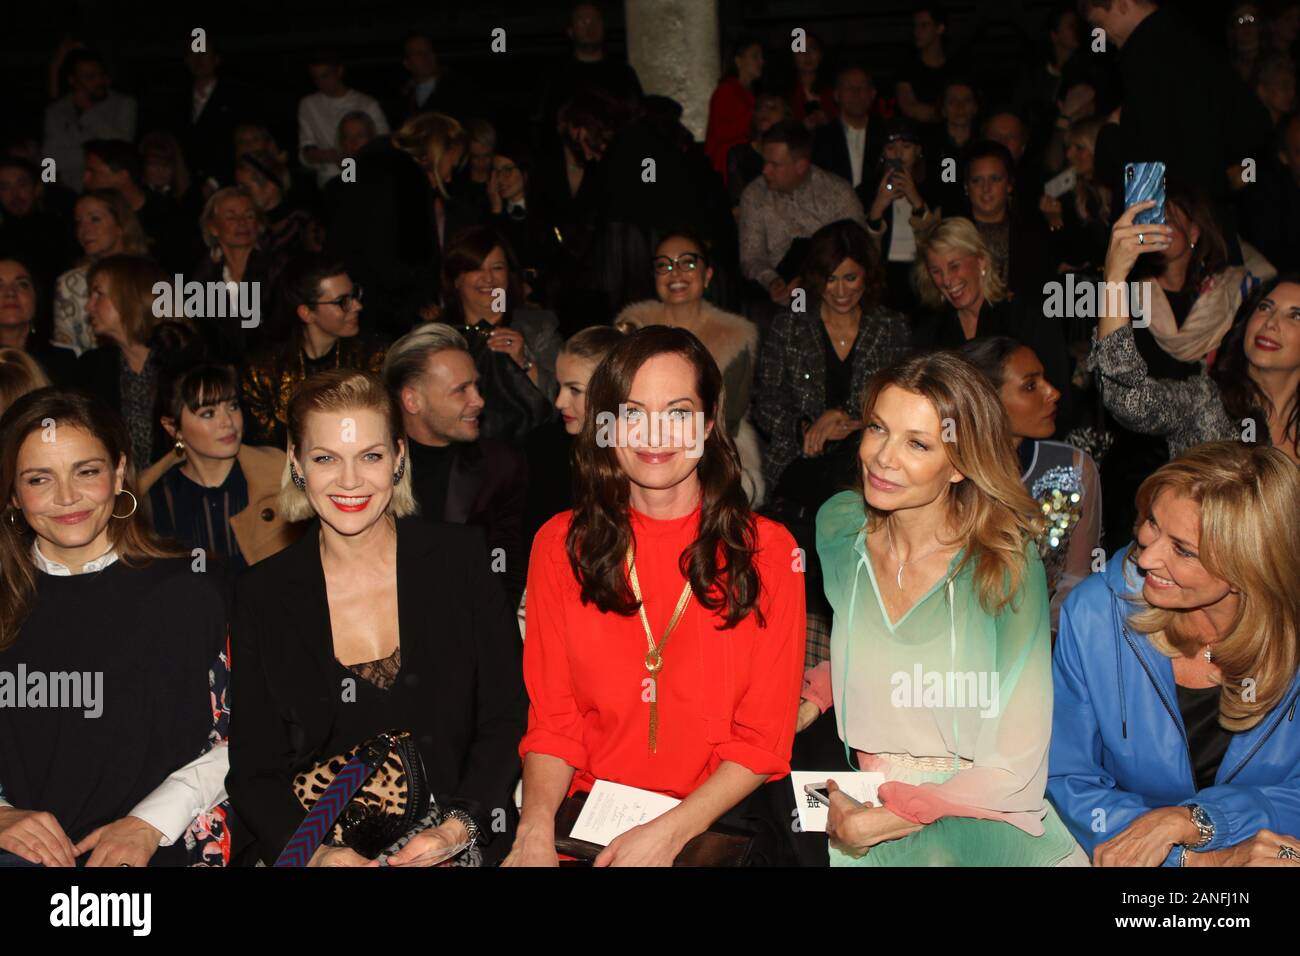 Germany, Berlin, 01/15/2020: (left-right) Rebecca Immanuel, Anna Loos, Natalia Woerner, Ursula Karven and Dagmar Woehrl  attend the Riani show during Berlin Fashion Week Autumn/Winter 2020 at Kraftwerk Mitte on January 15, 2020 in Berlin, Germany. Stock Photo